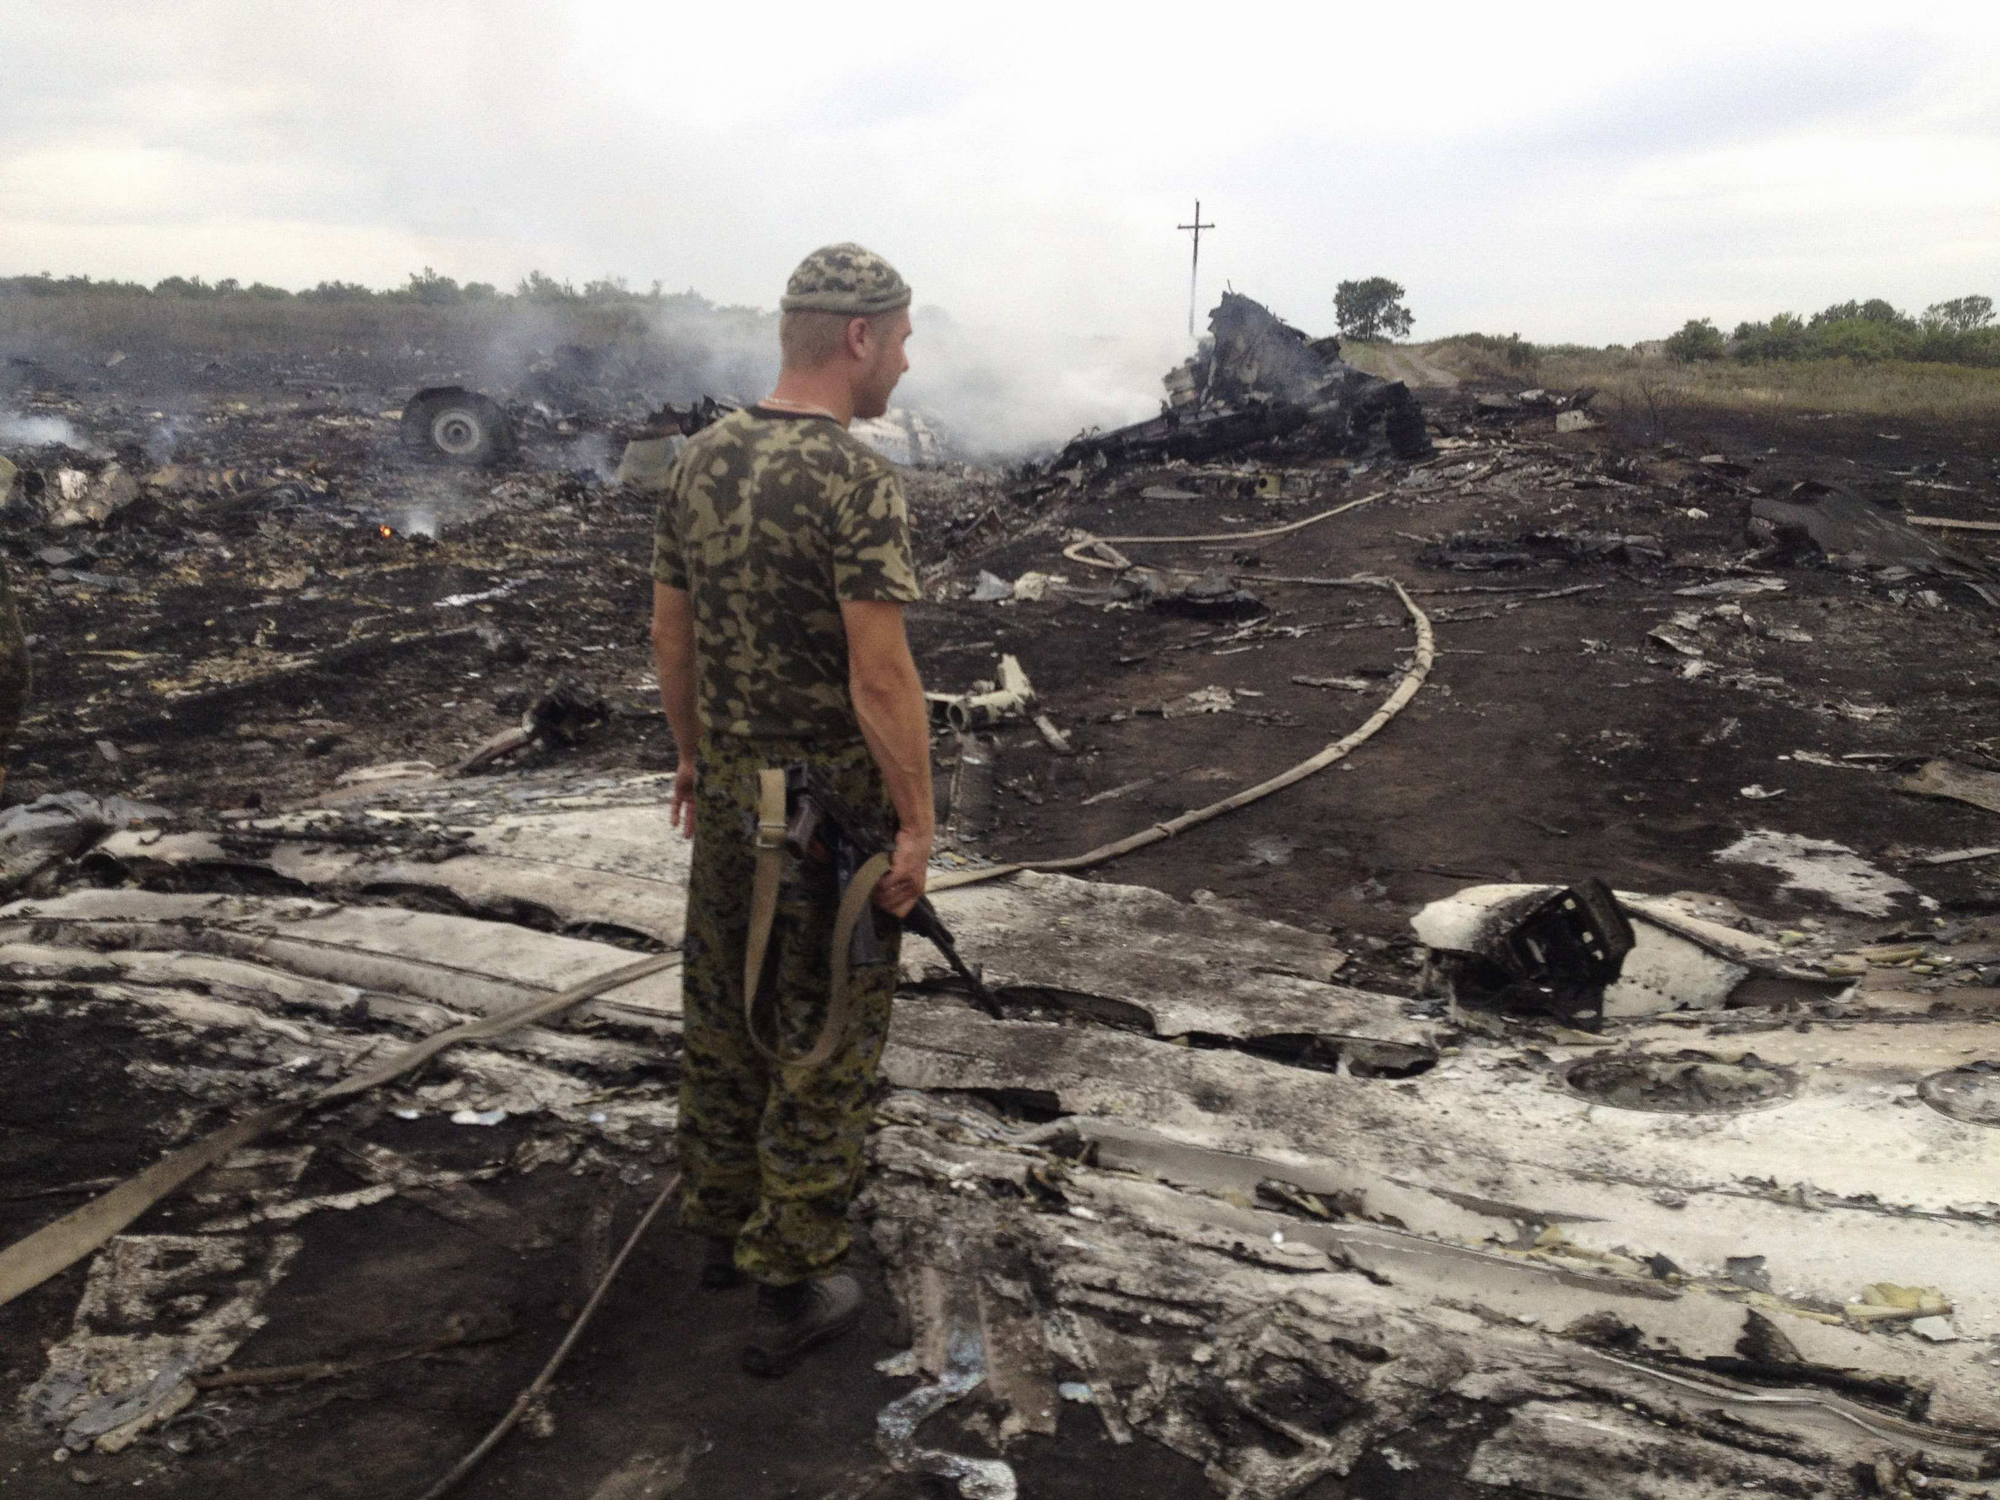 An armed pro-Russian separatist stands at a site of a Malaysia Airlines Boeing 777 plane crash in the settlement of Grabovo in the Donetsk region, July 17, 2014.